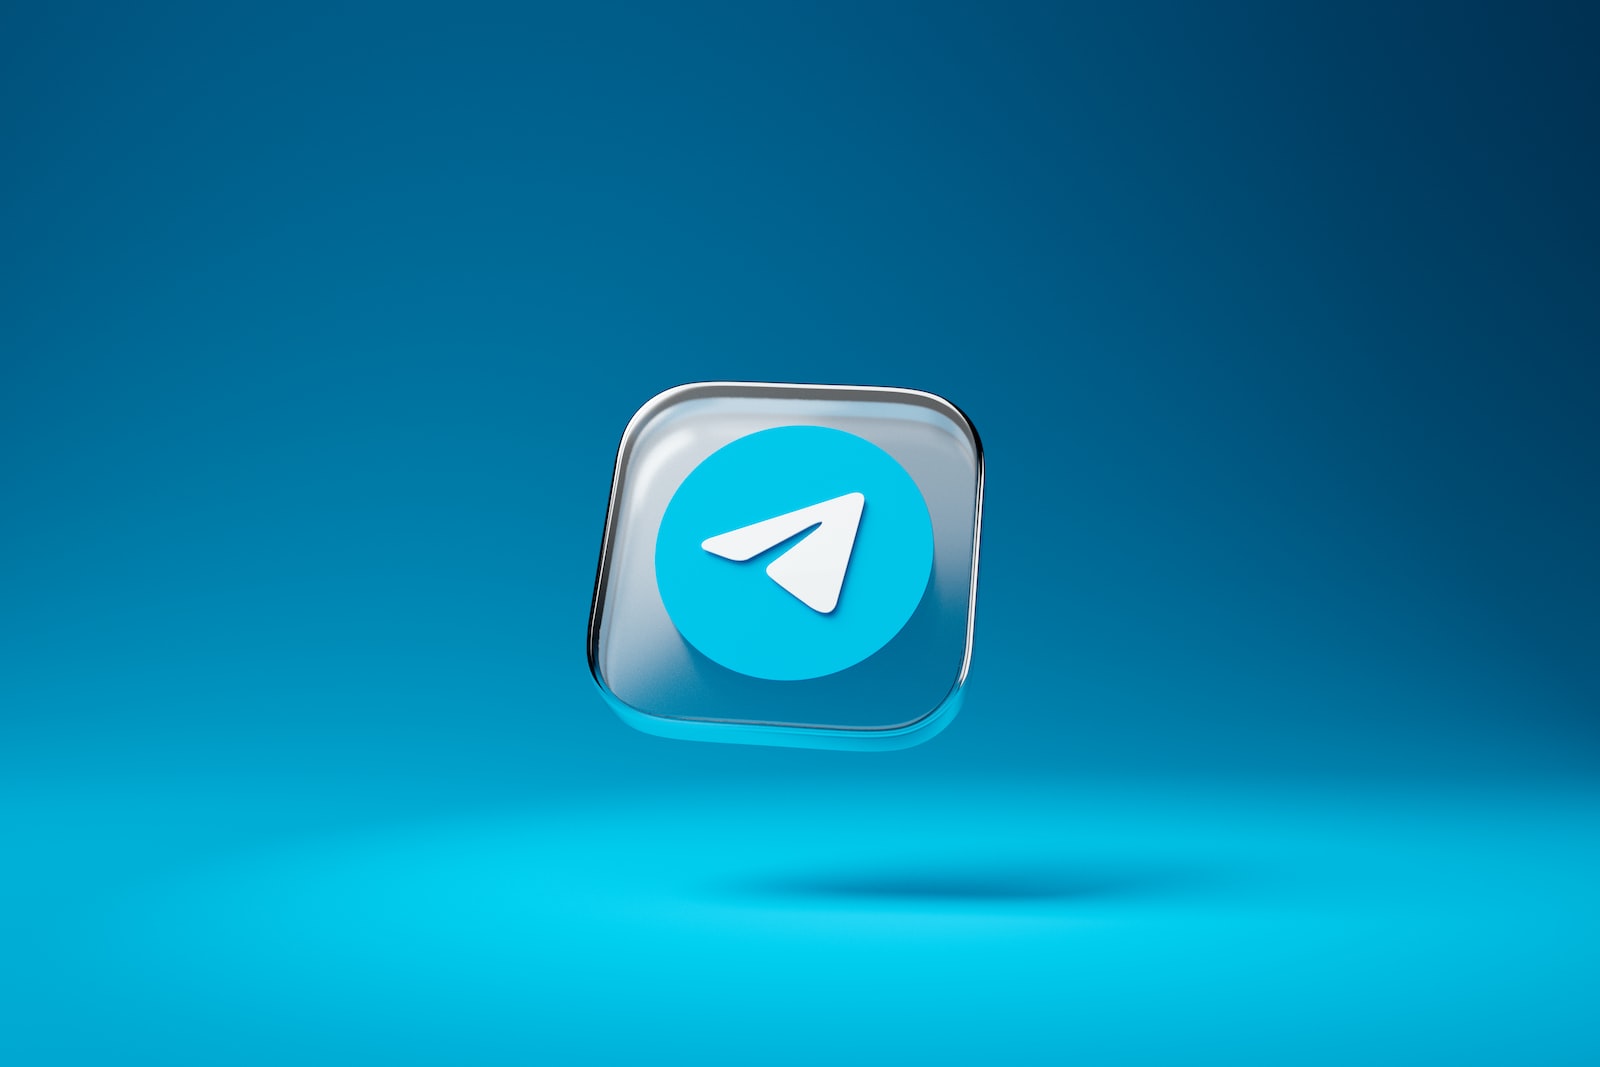 Telegram: how to ensure your phone number privacy